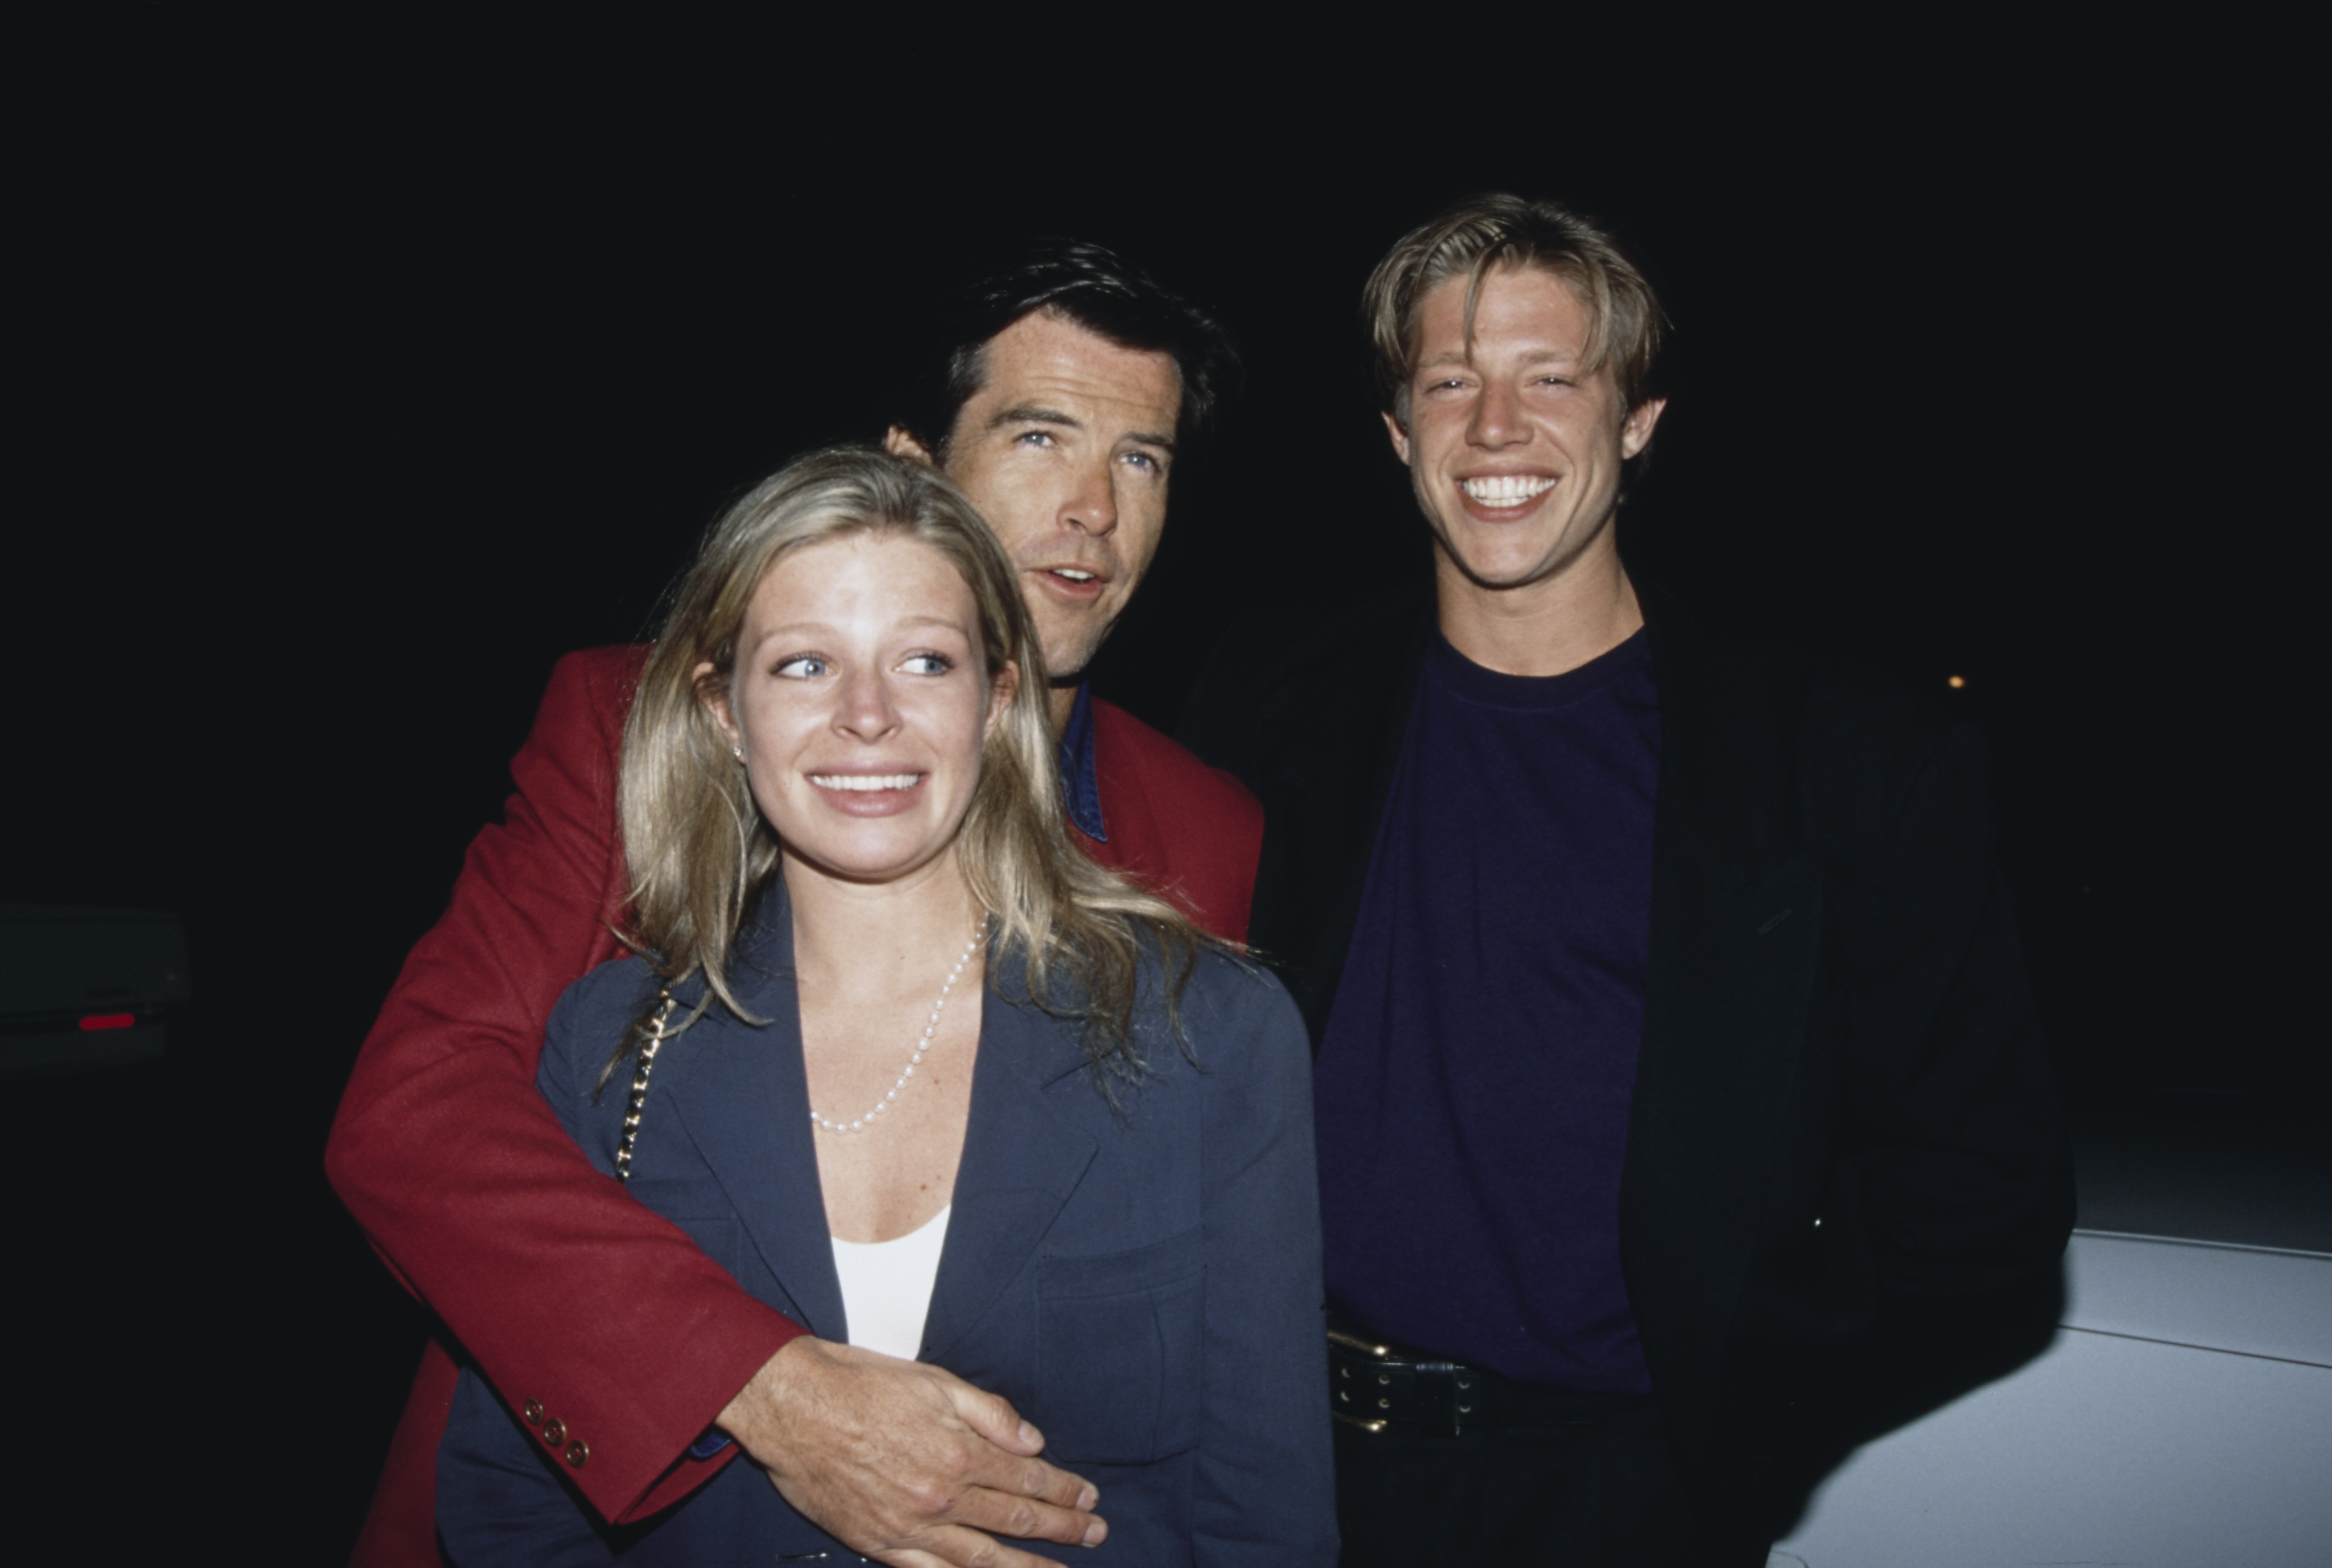 Irish actor Pierce Brosnan kisses his adopted daughter Charlotte Harris (1971-2013) alongside Harris' partner, American entertainer Alex Smith, at an after party, held at Spago in West Hollywood, California on May 8 1993. |  Source: Getty Images